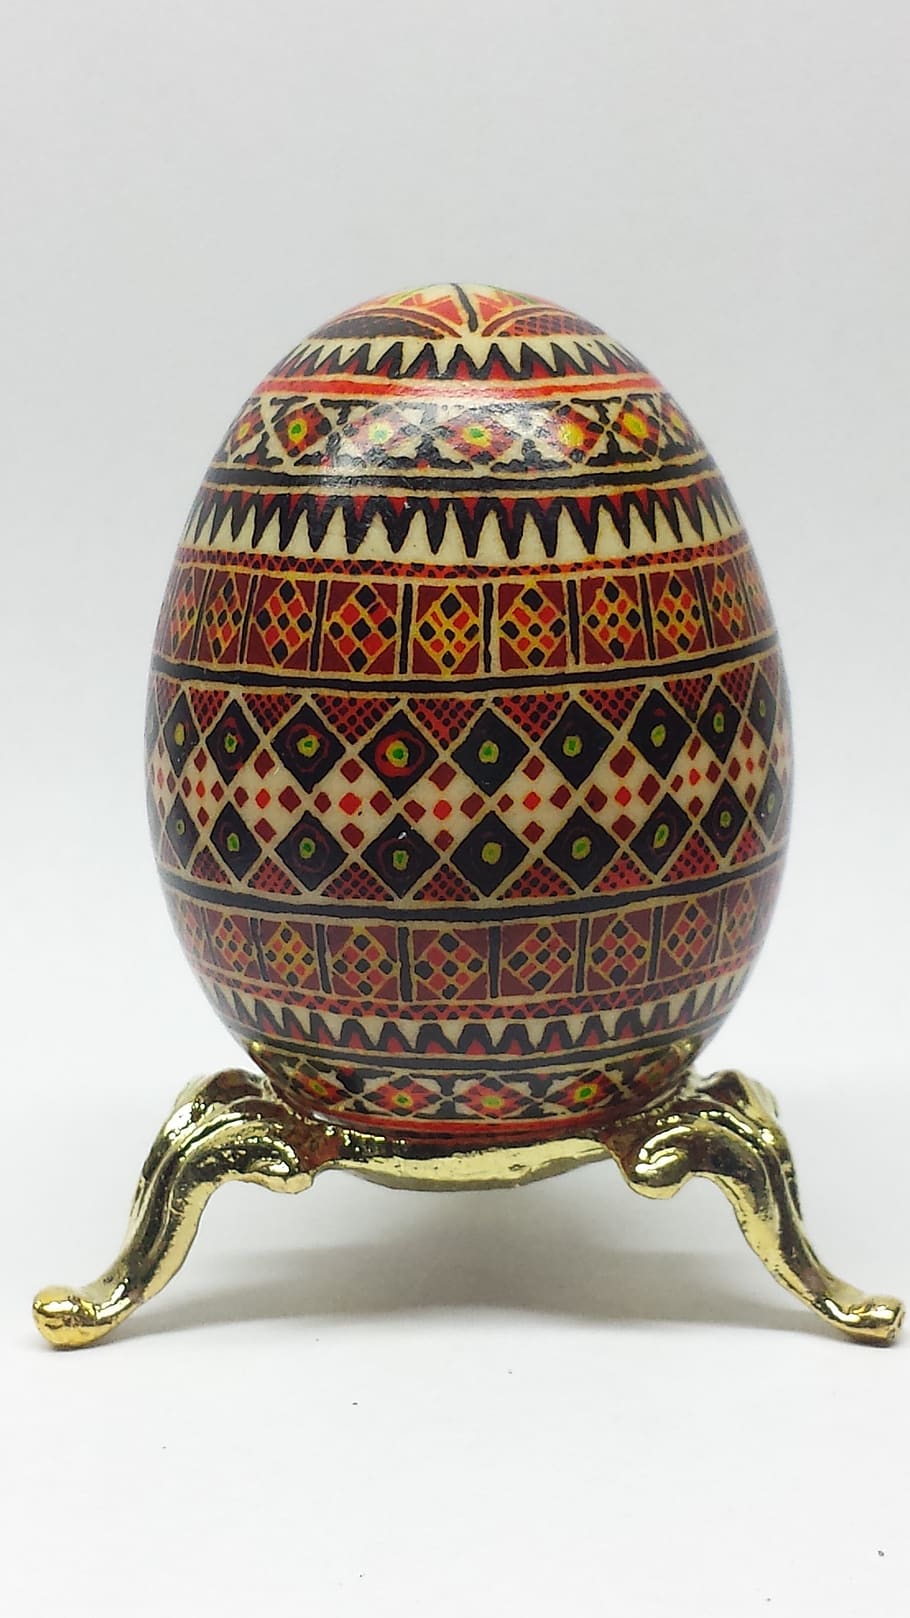 easter, ukraine, egg, pysanka, painted, culture, customs, pattern, paganism, holiday